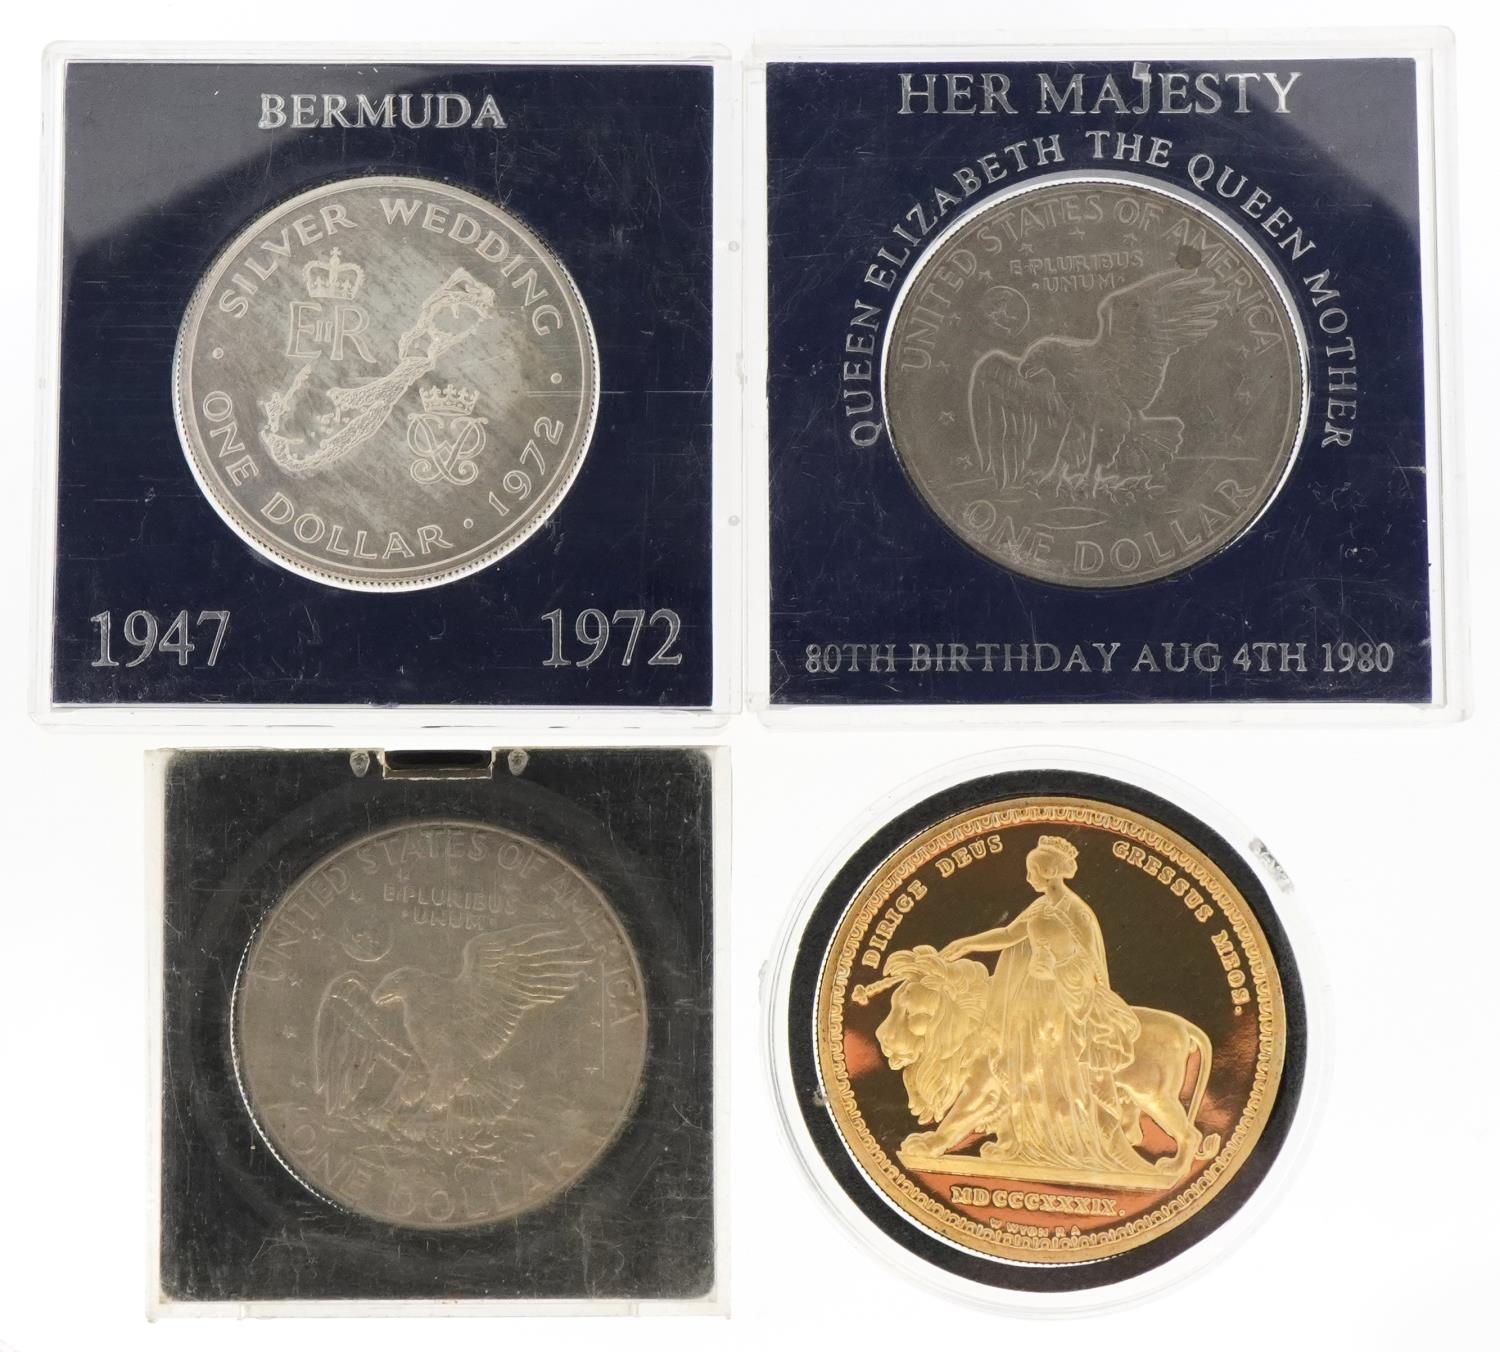 Two 1972 Liberty Dollars, silver wedding dollar and a silver copy of a Queen Victoria five pound